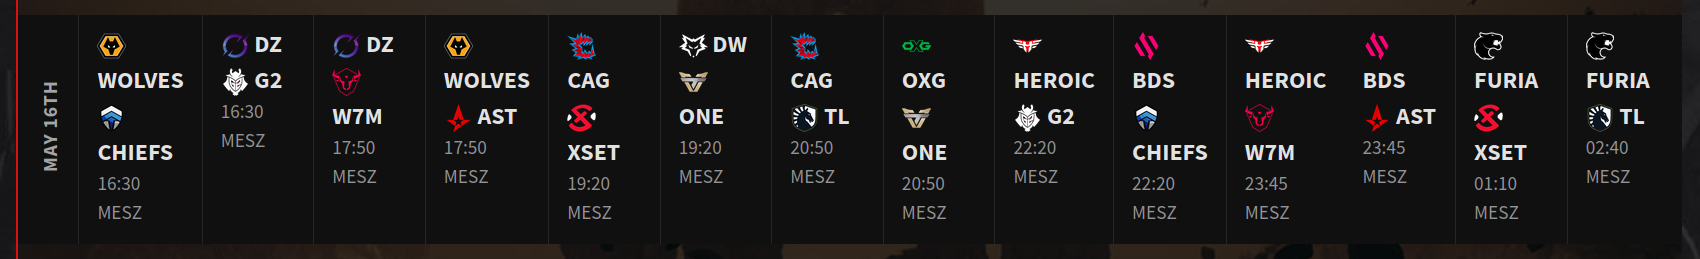 All matches of the first day of the major crammed in a single horizontal section.